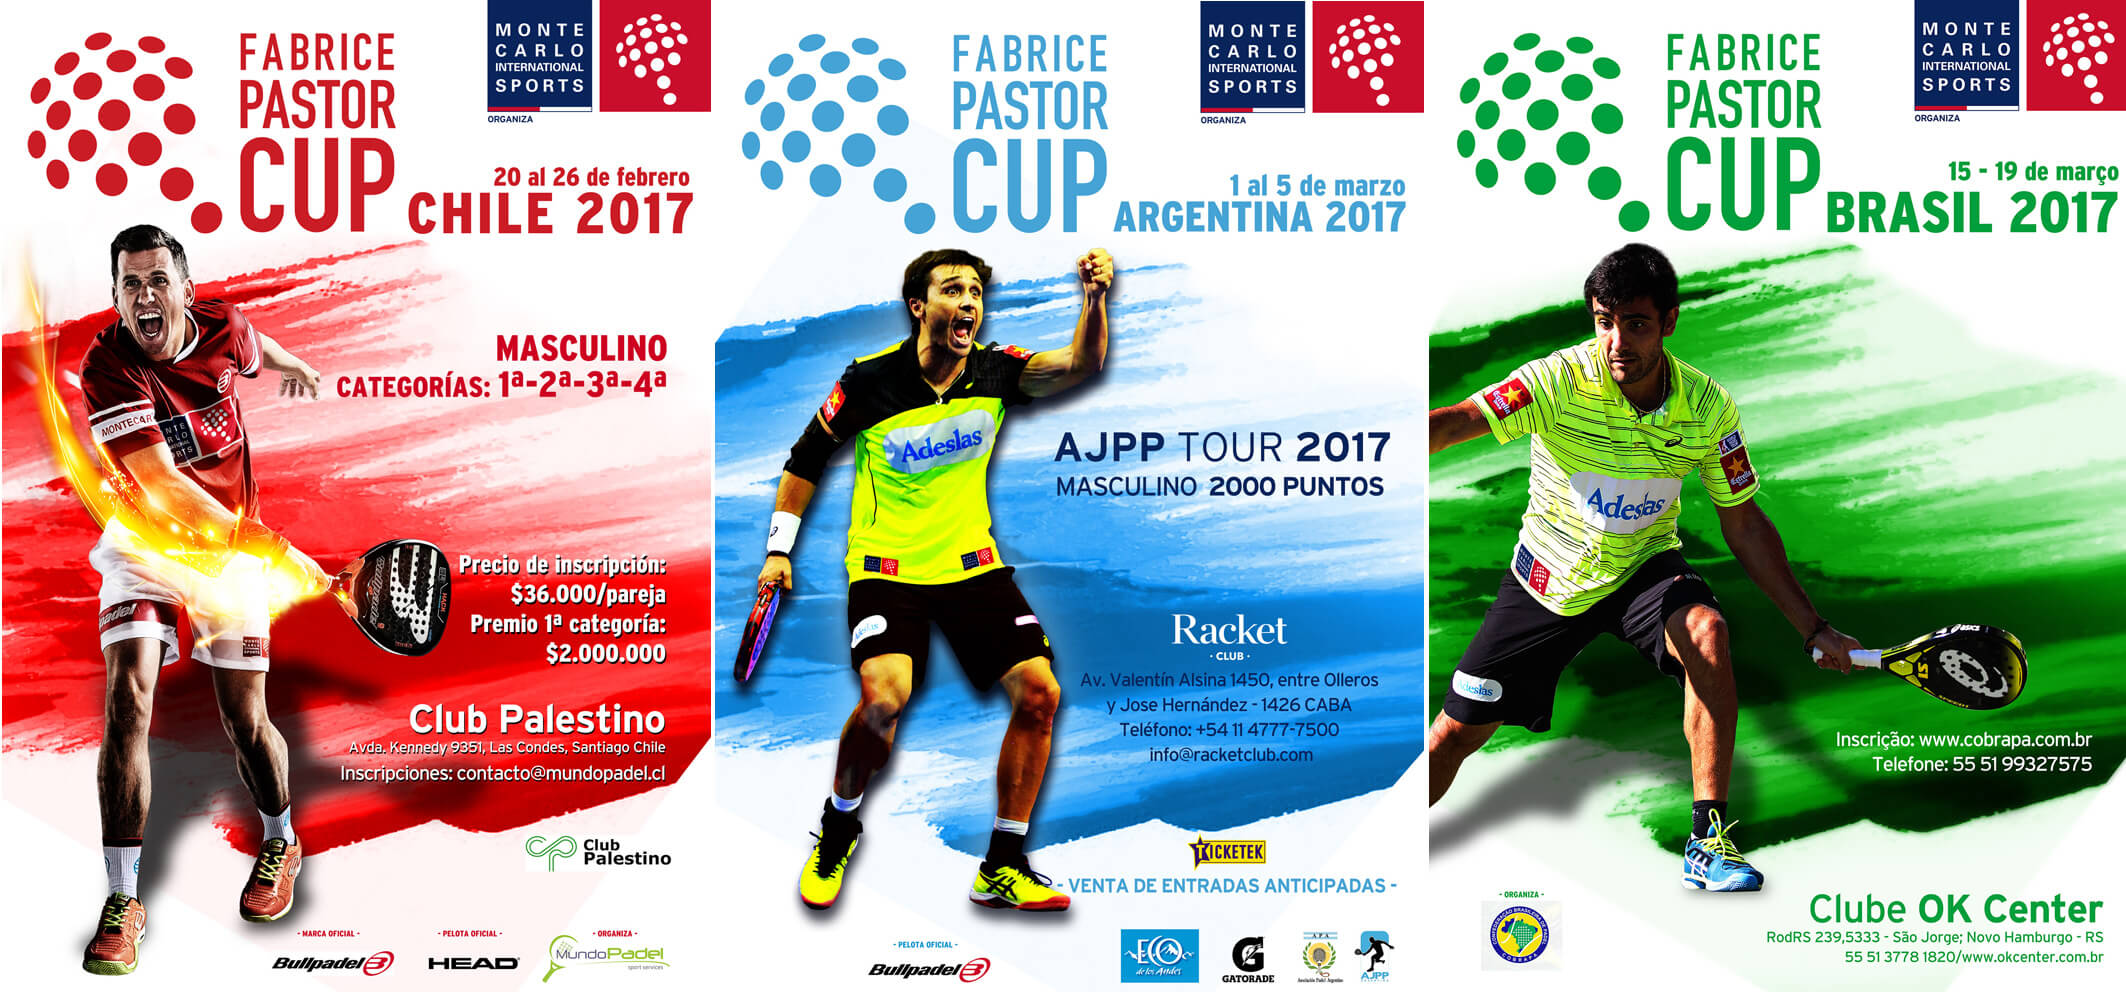 The Fabrice Pastor Cup in Chile, Argentina and Brazil